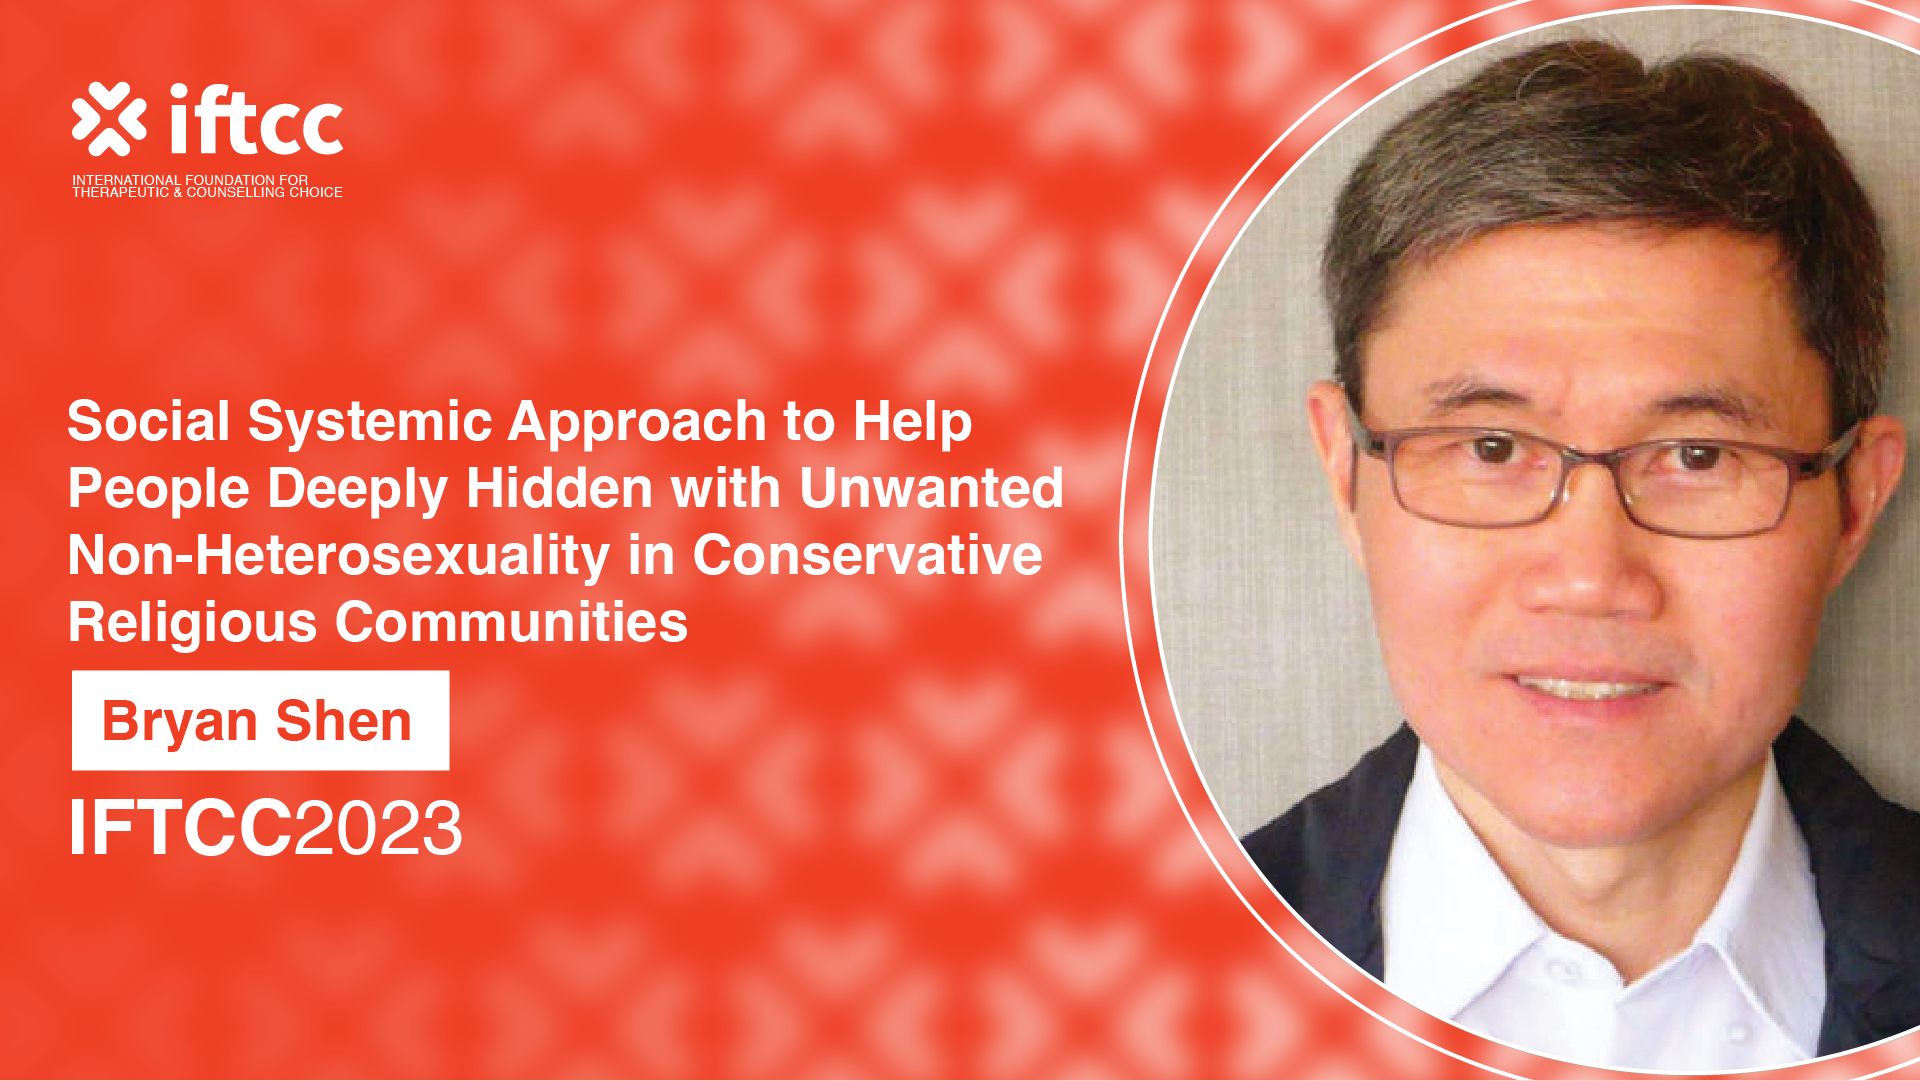 Session 9 – Social Systemic Approach to Help People Deeply Hidden with Unwanted Non-Heterosexuality in Conservative Religious Communities [S9-23-24]